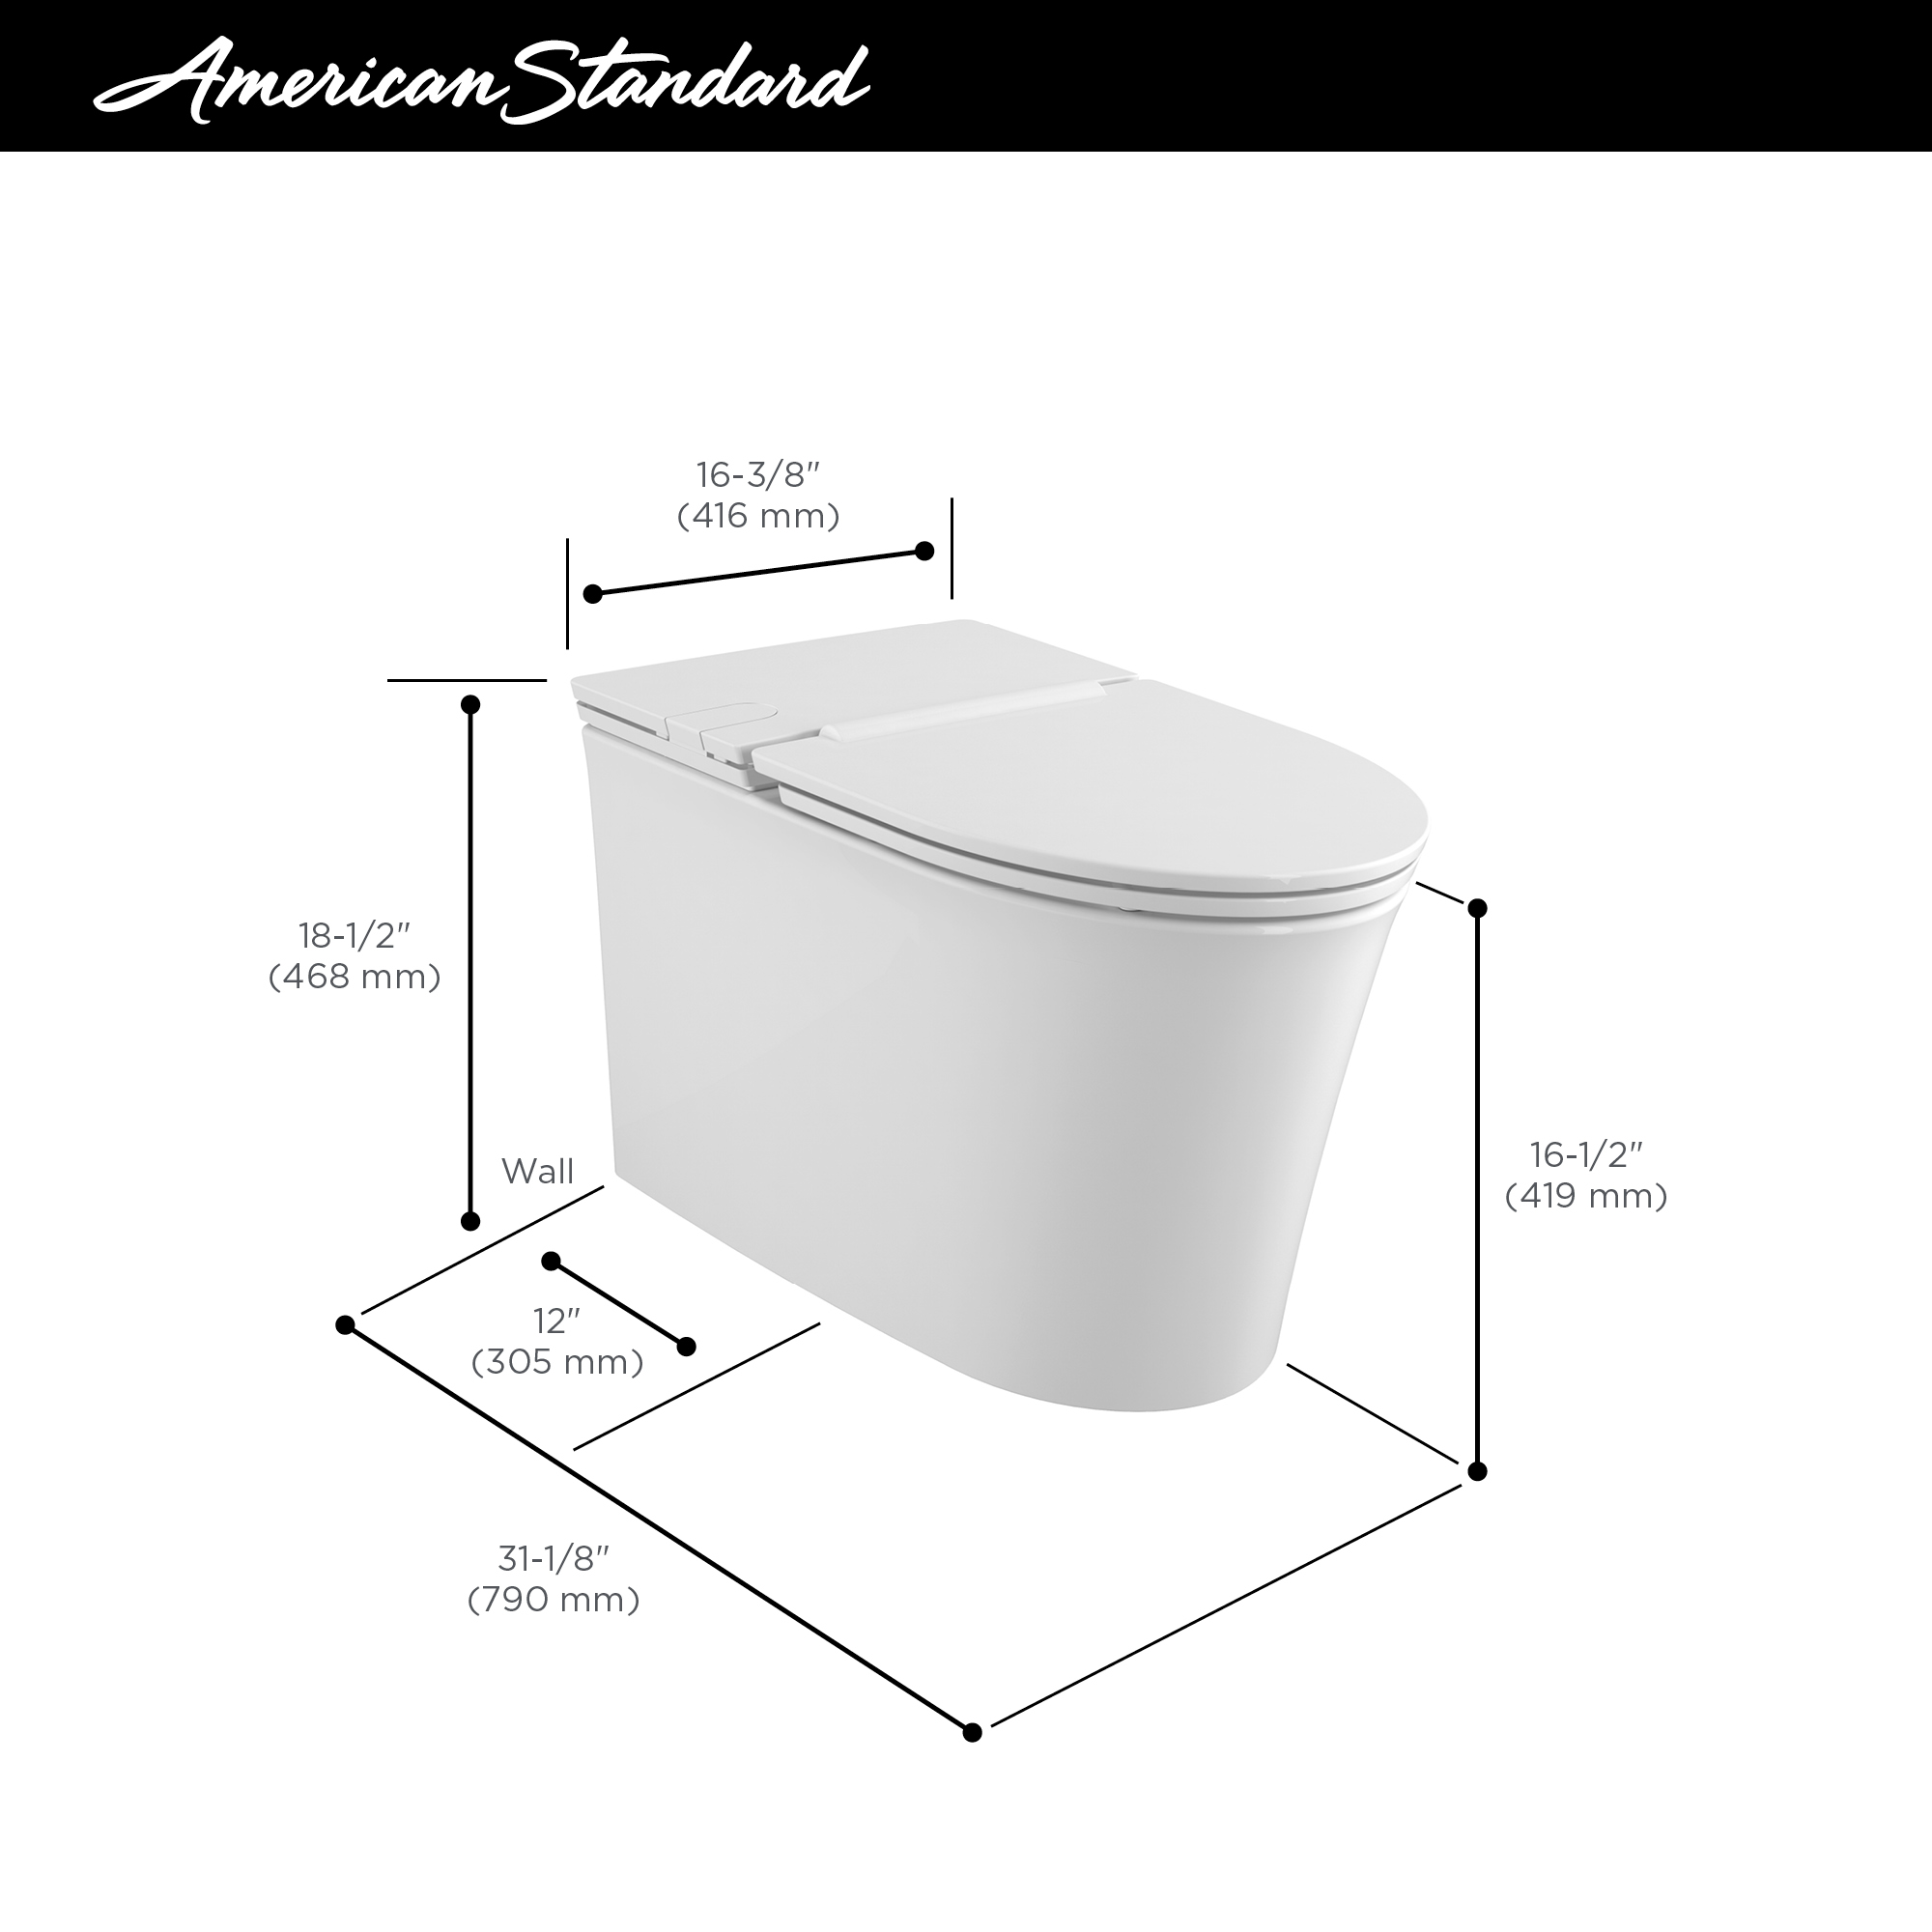 American Standard Studio S 1-piece 1.0 GPF White Elongated Low-Profile Toilet, Seat Included - image 5 of 14